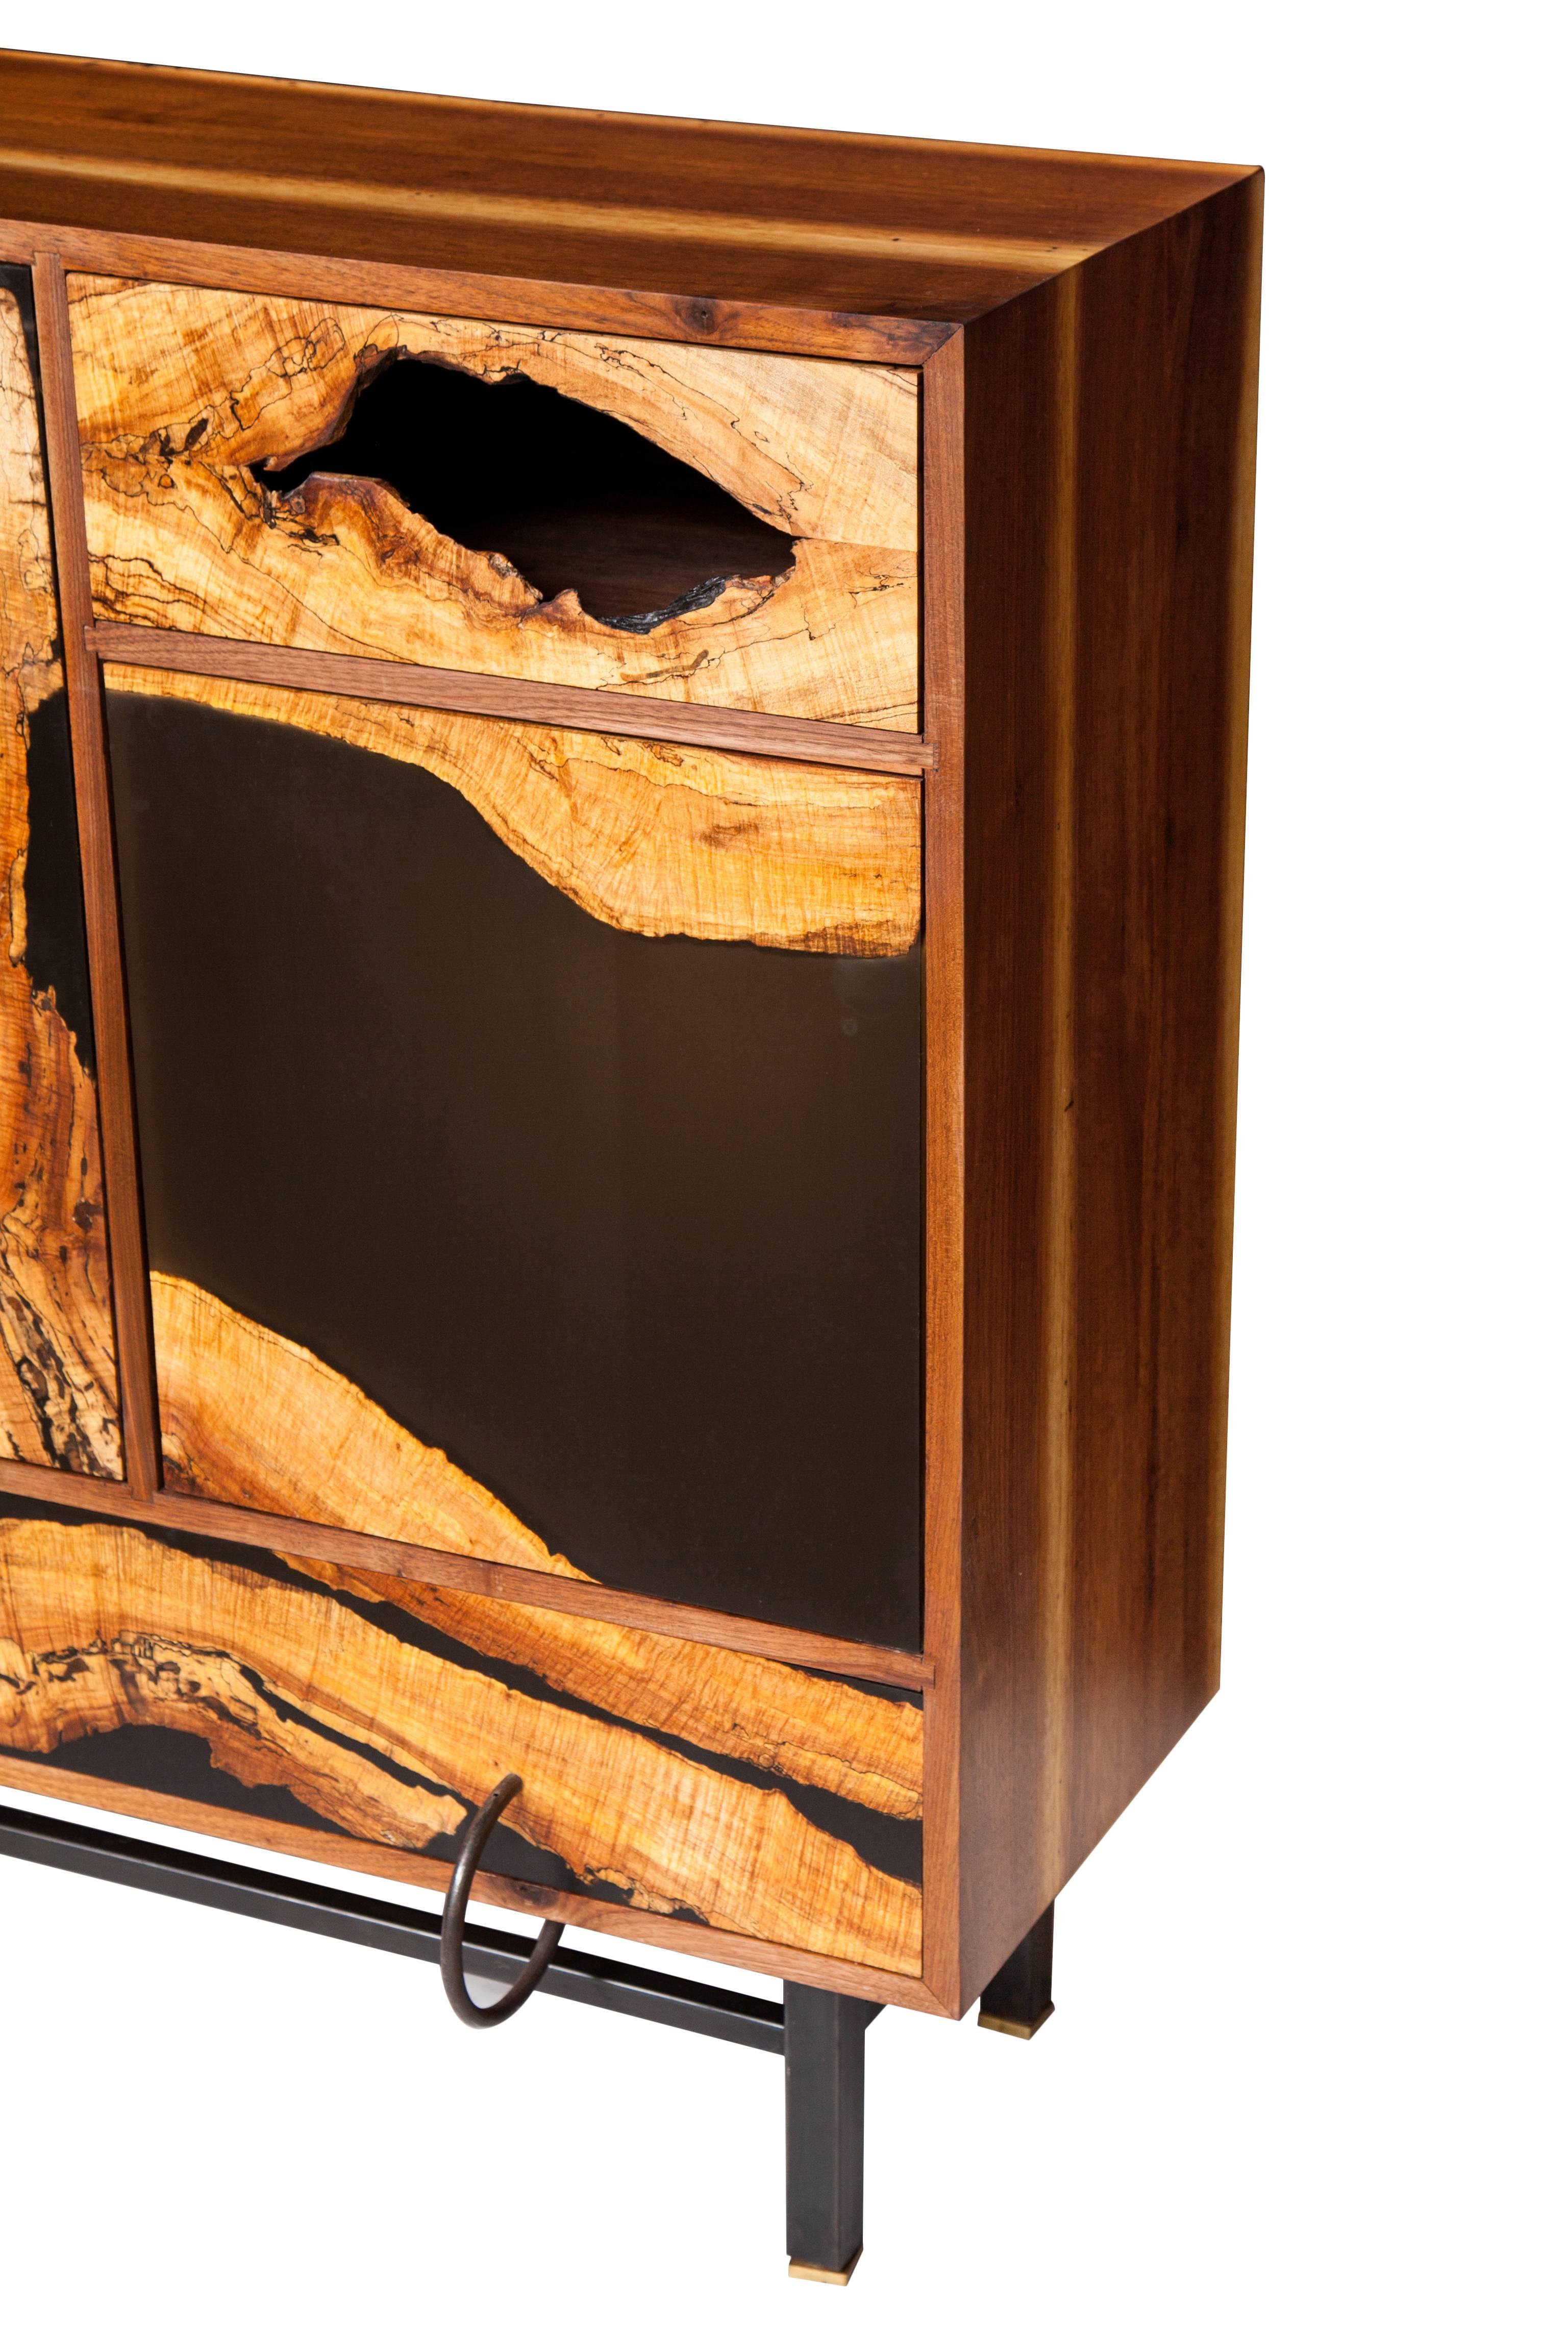 American Craftsman Spalted Maple Face Cabinet by Don Howell, circa 2010 For Sale